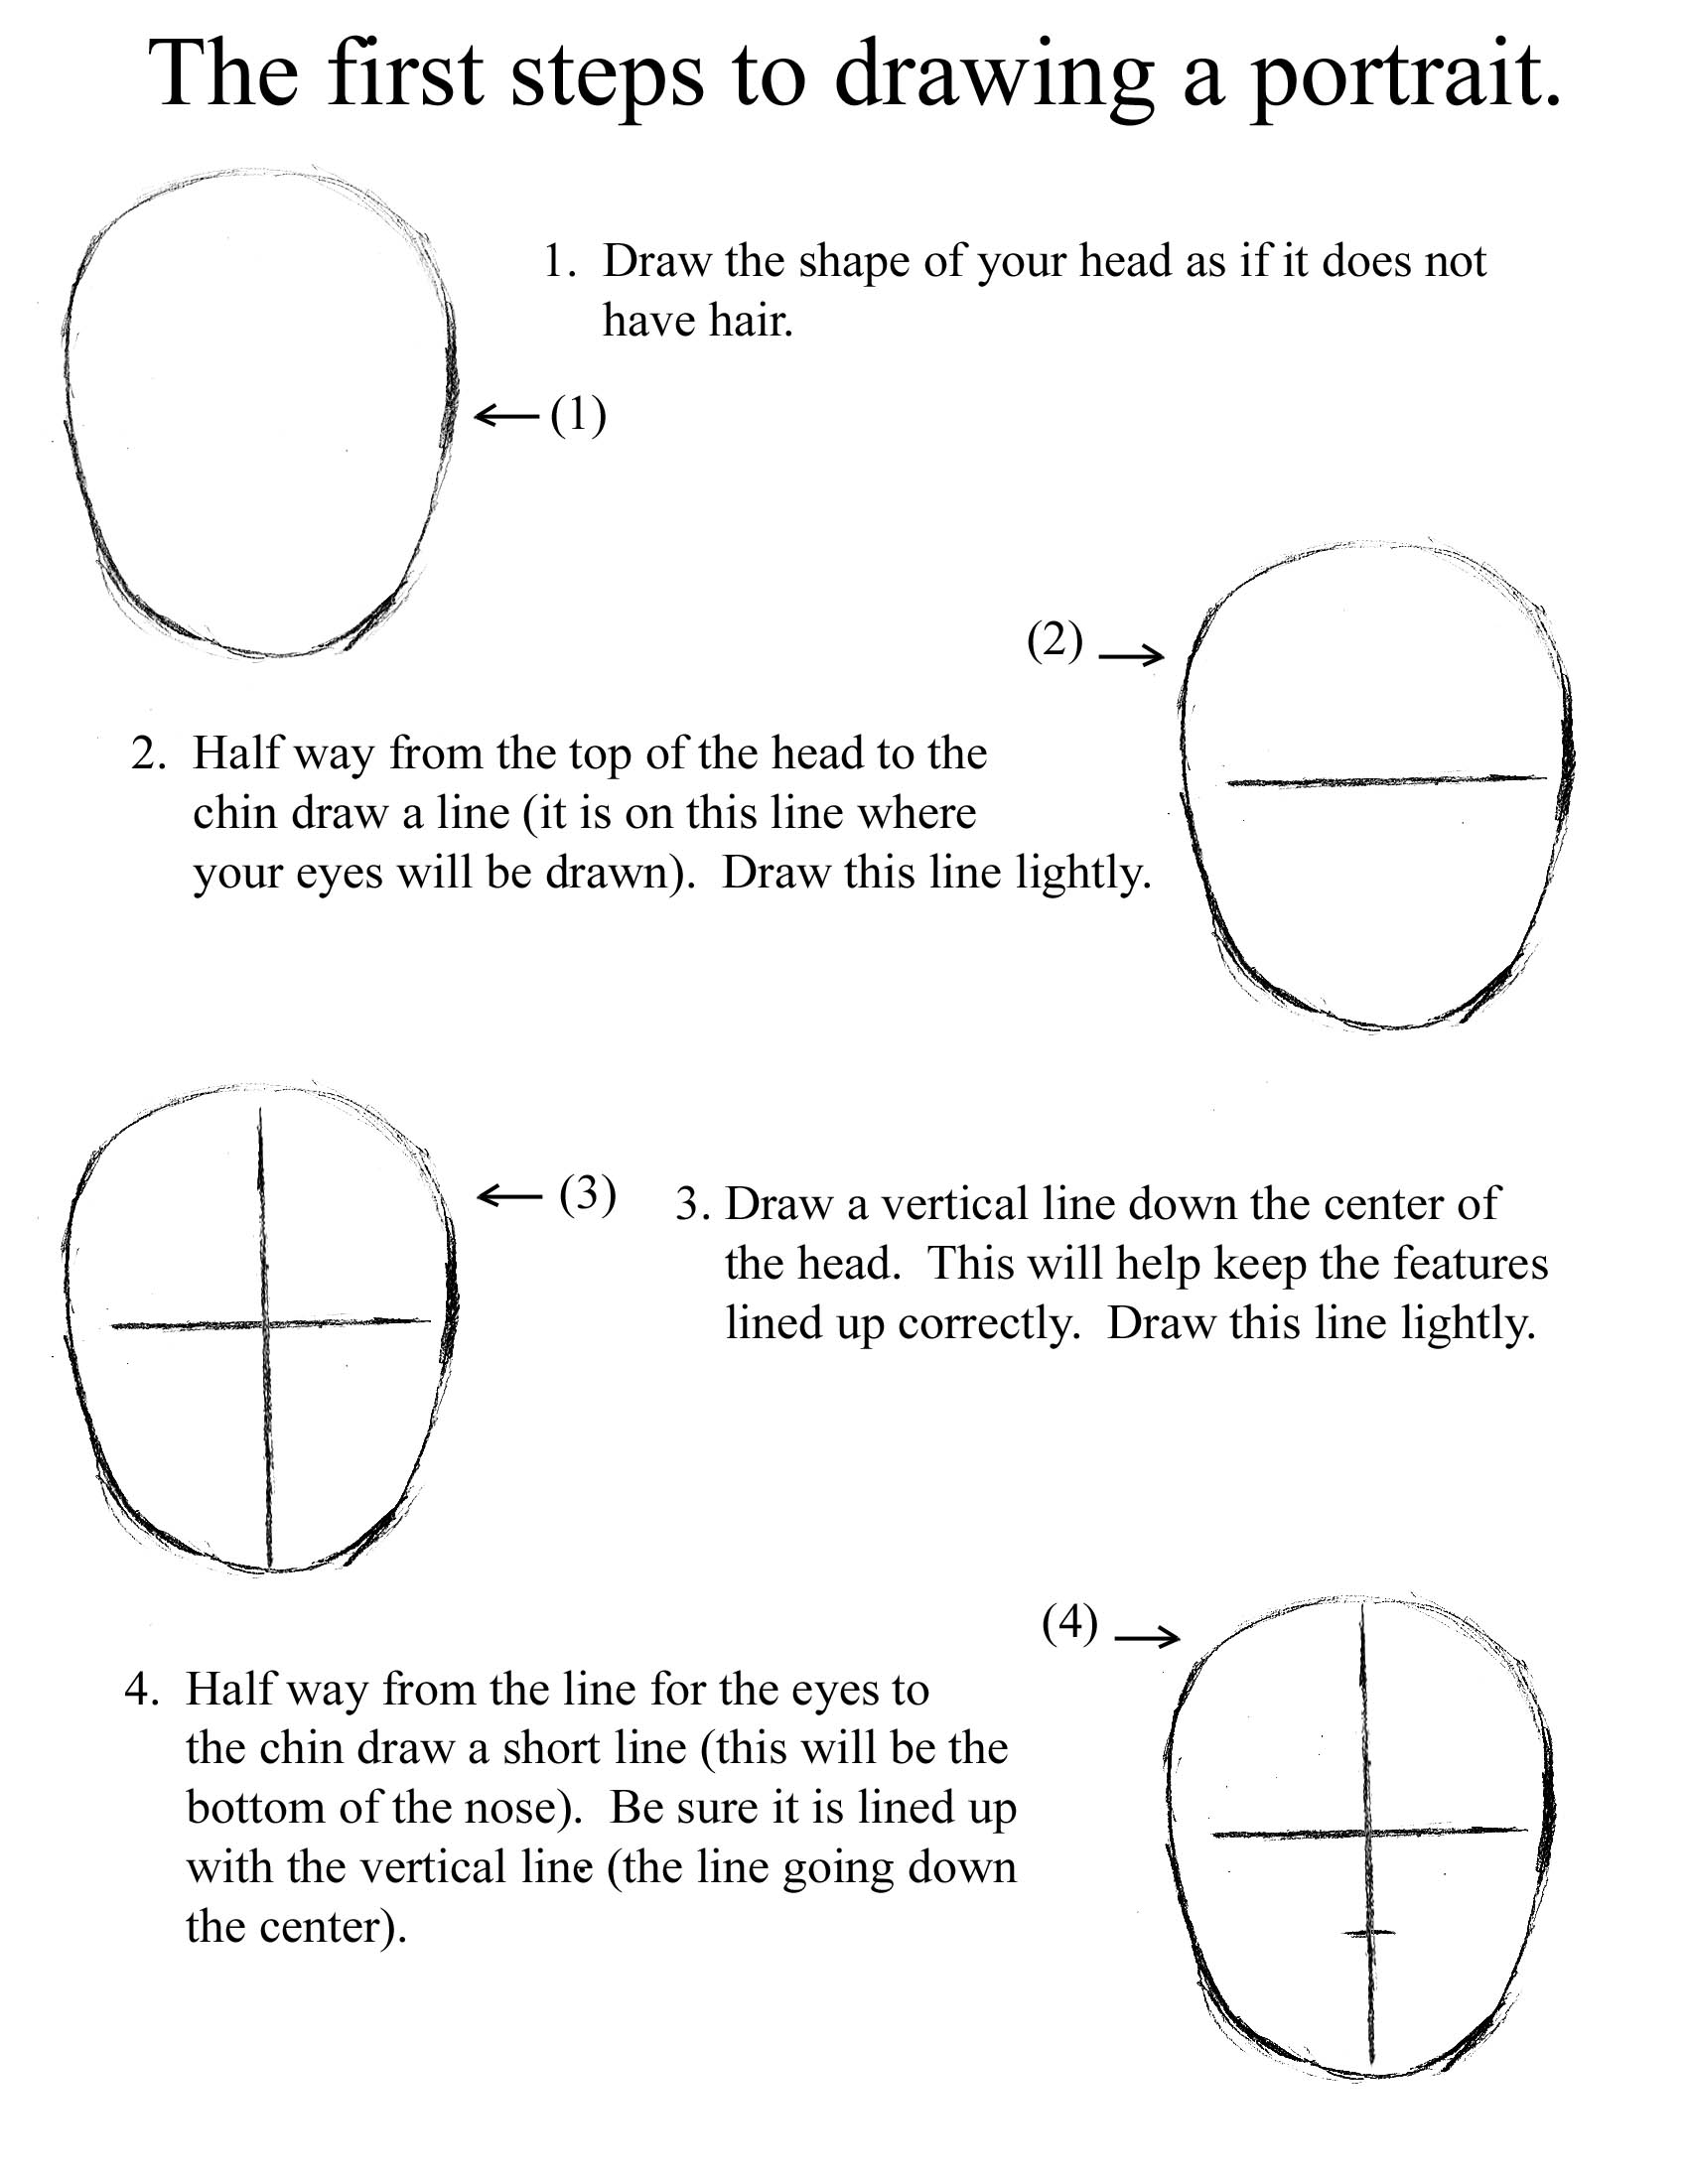 Great How To Draw A Portrait Step By Step of all time Learn more here 